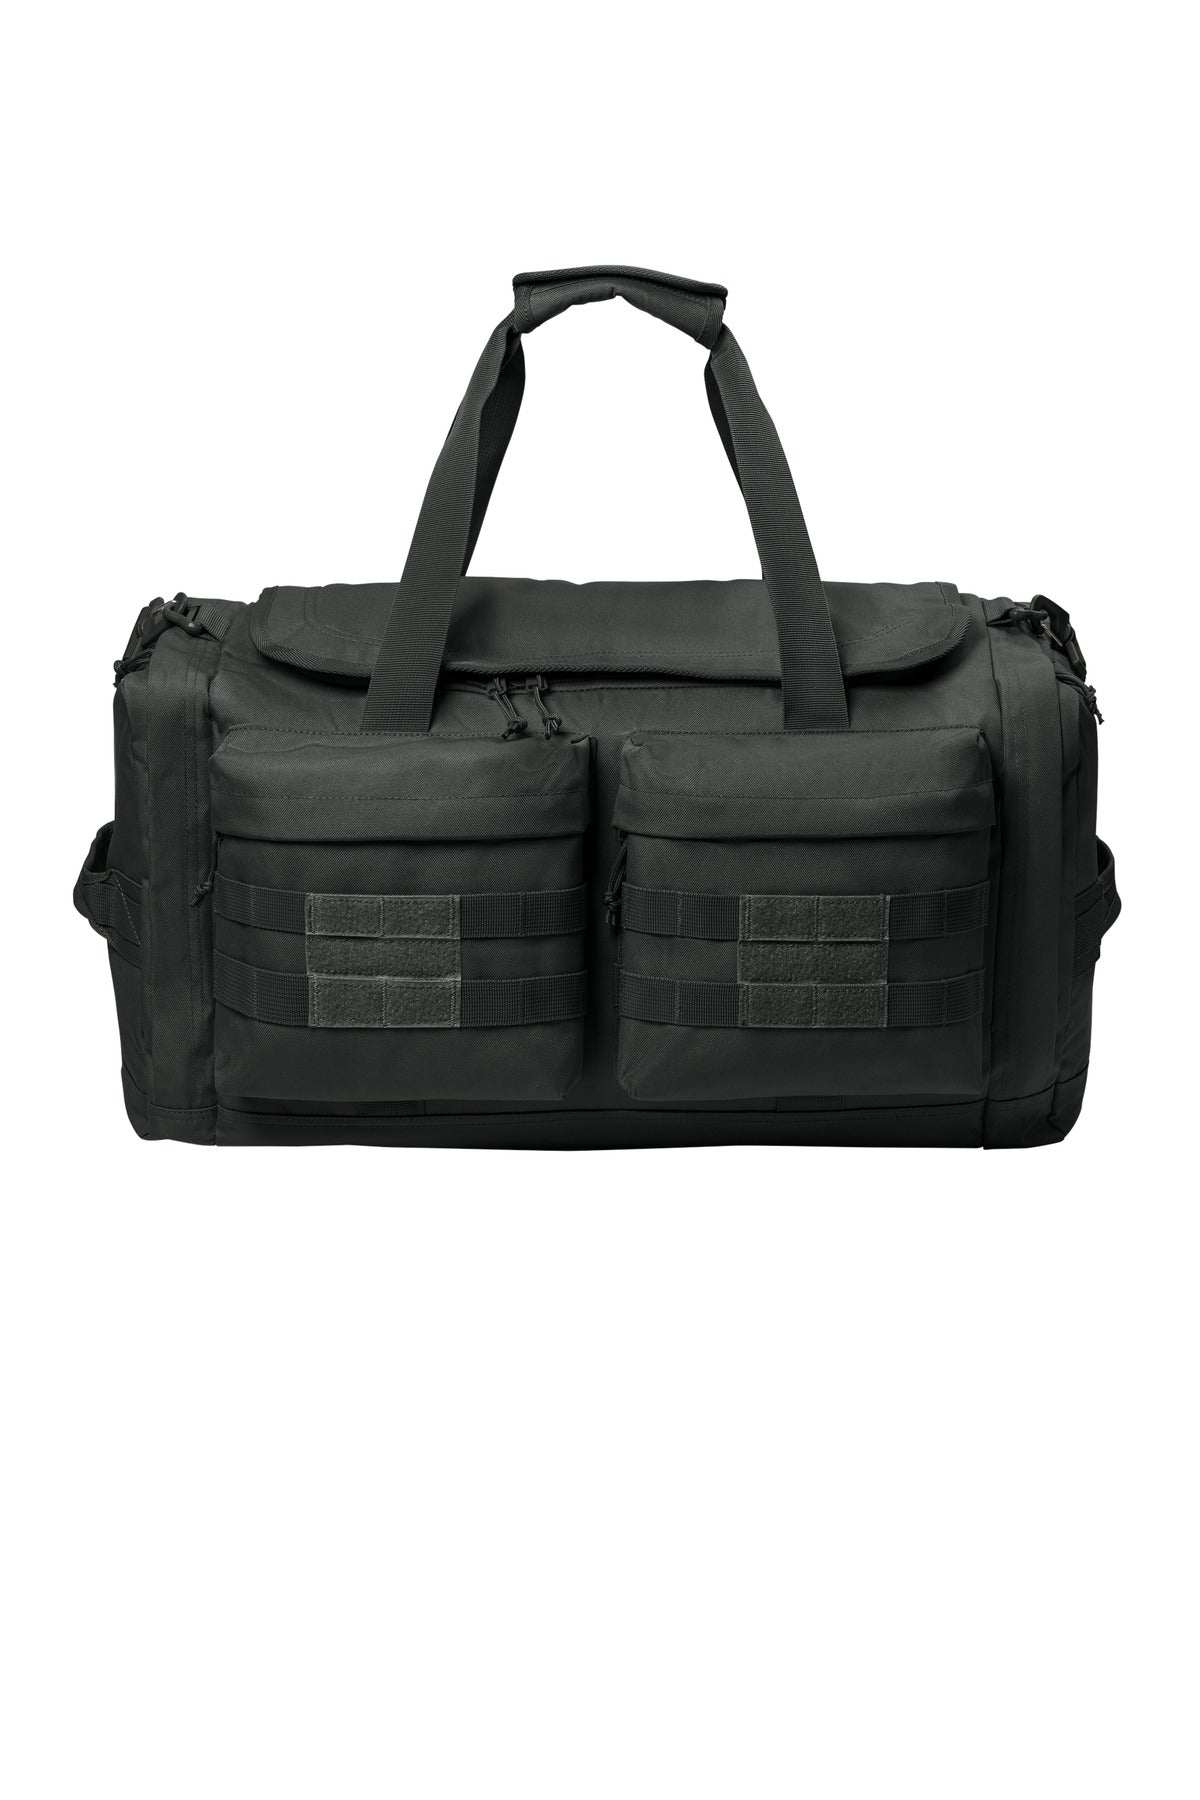 Photo of CornerStone Bags CSB815  color  Charcoal